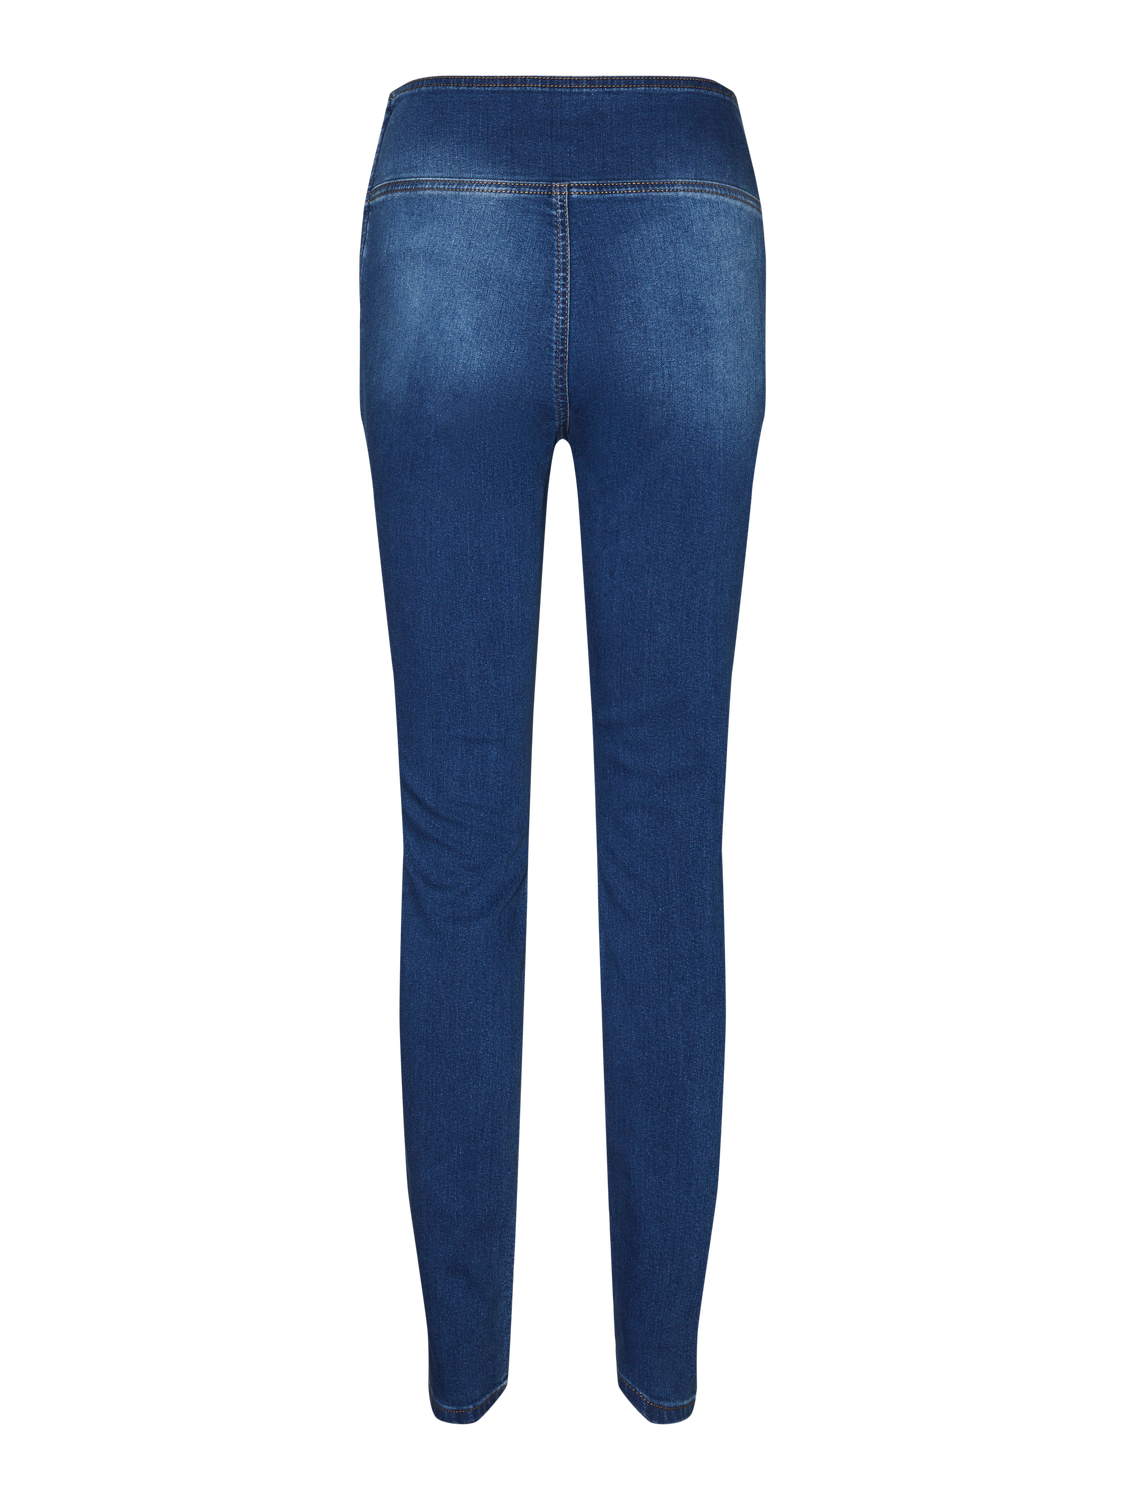 MAMA.LICIOUS Jeans Jegging Fit Taille moyenne -Medium Blue Denim - 20020040